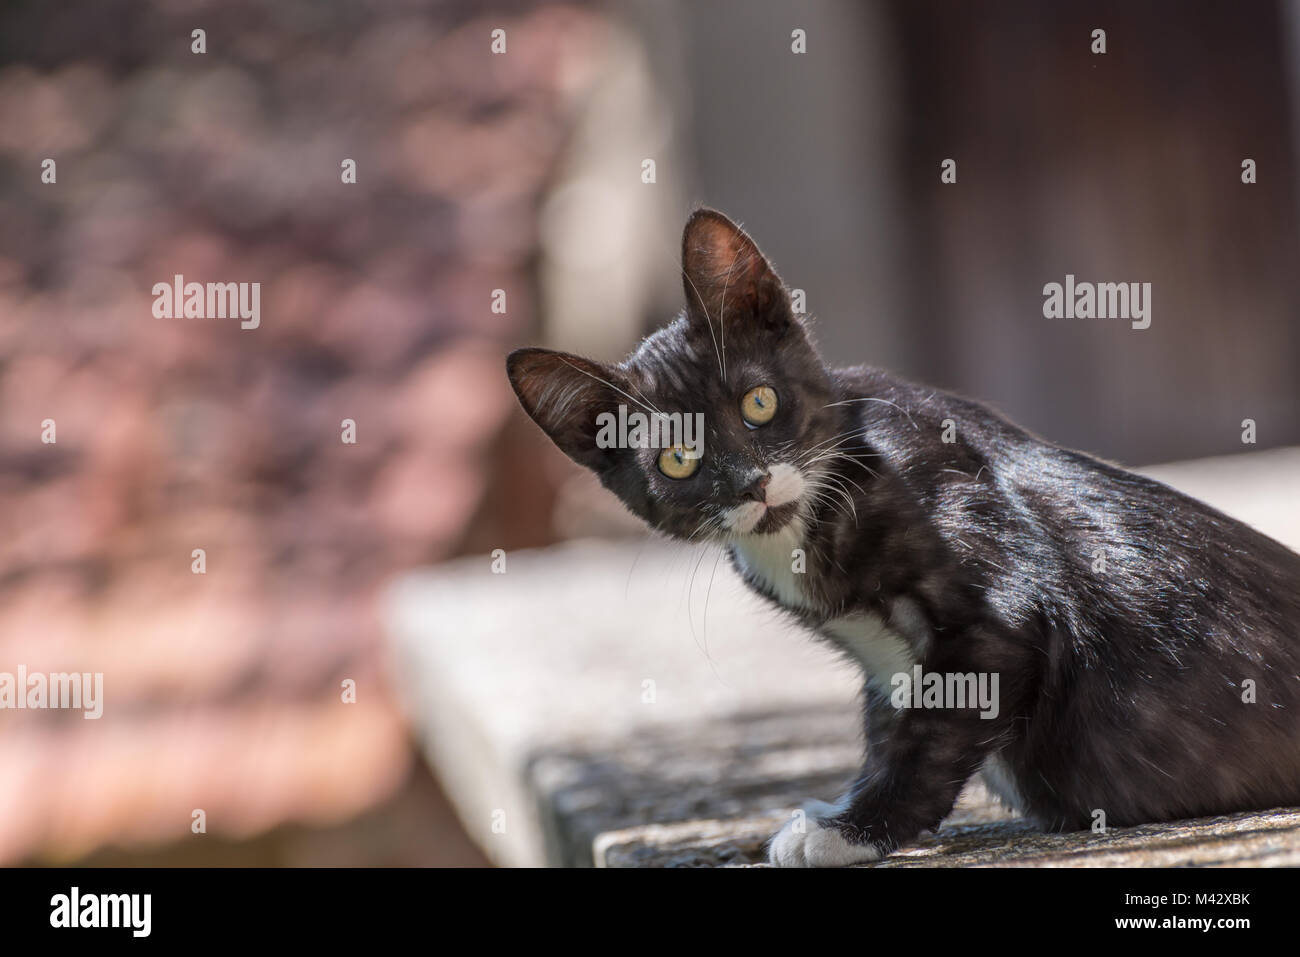 Black cat with white spots with blurred background Stock Photo